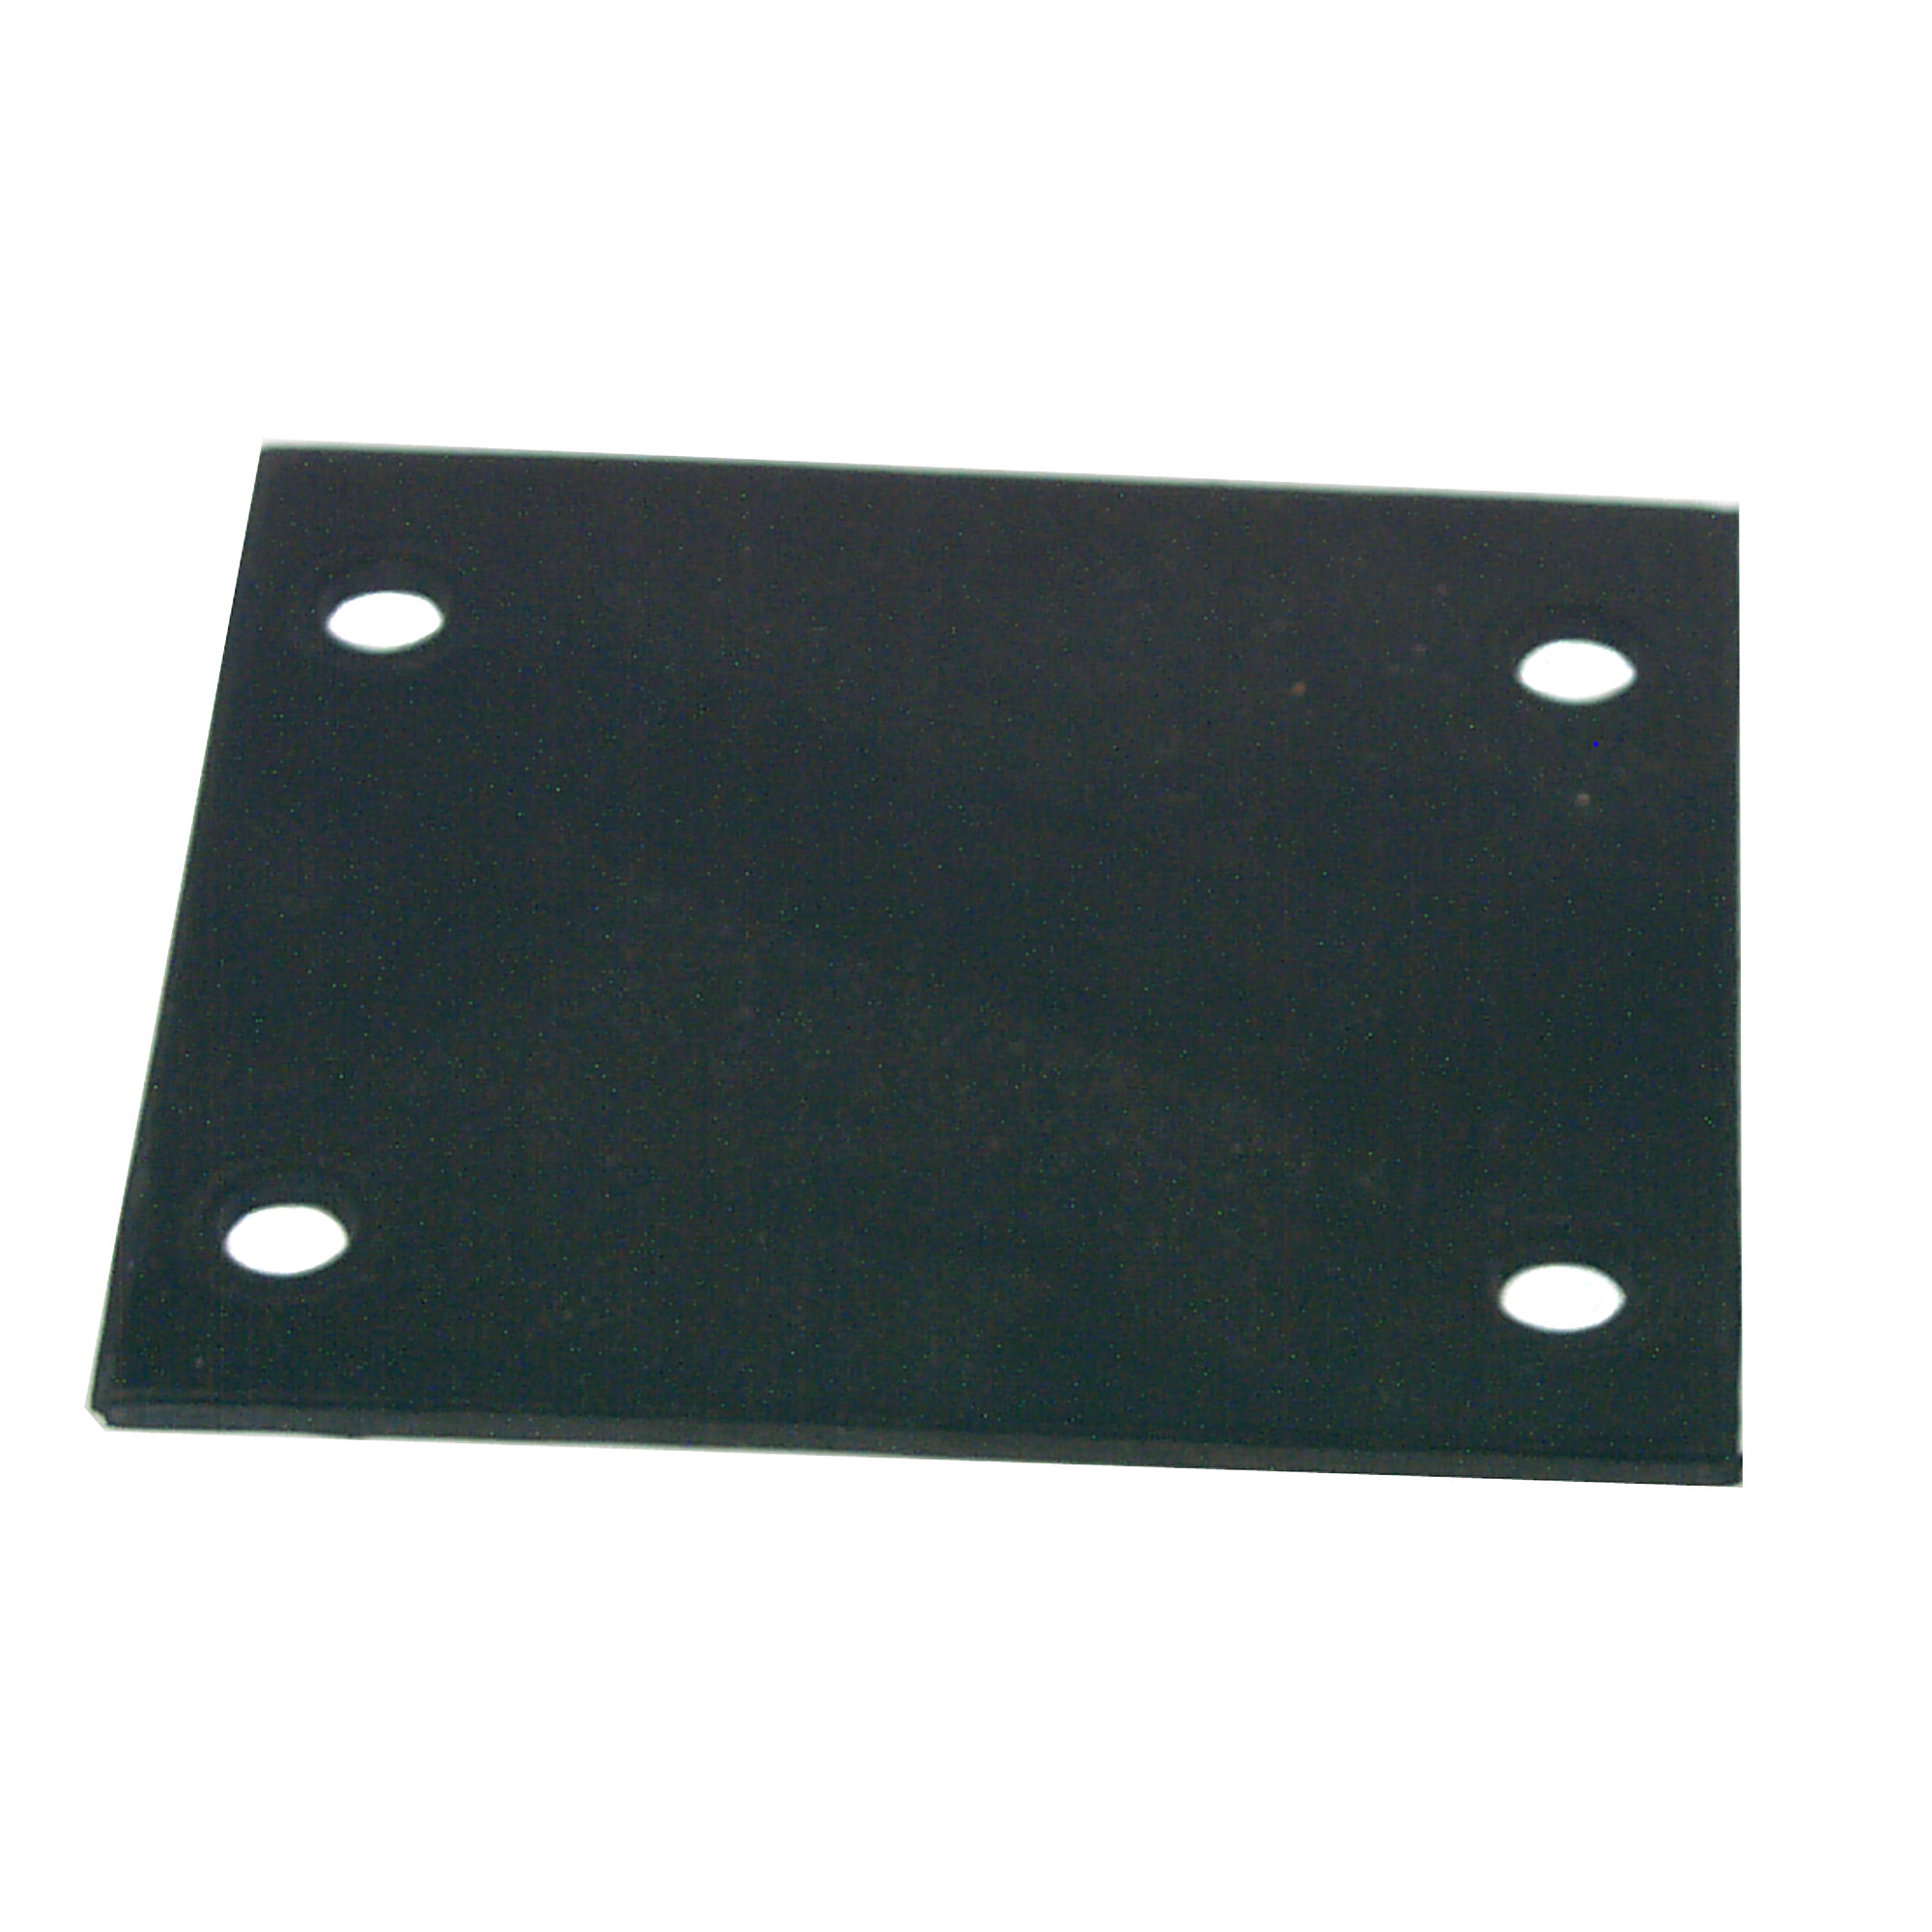 Rubber Pad for Transmission